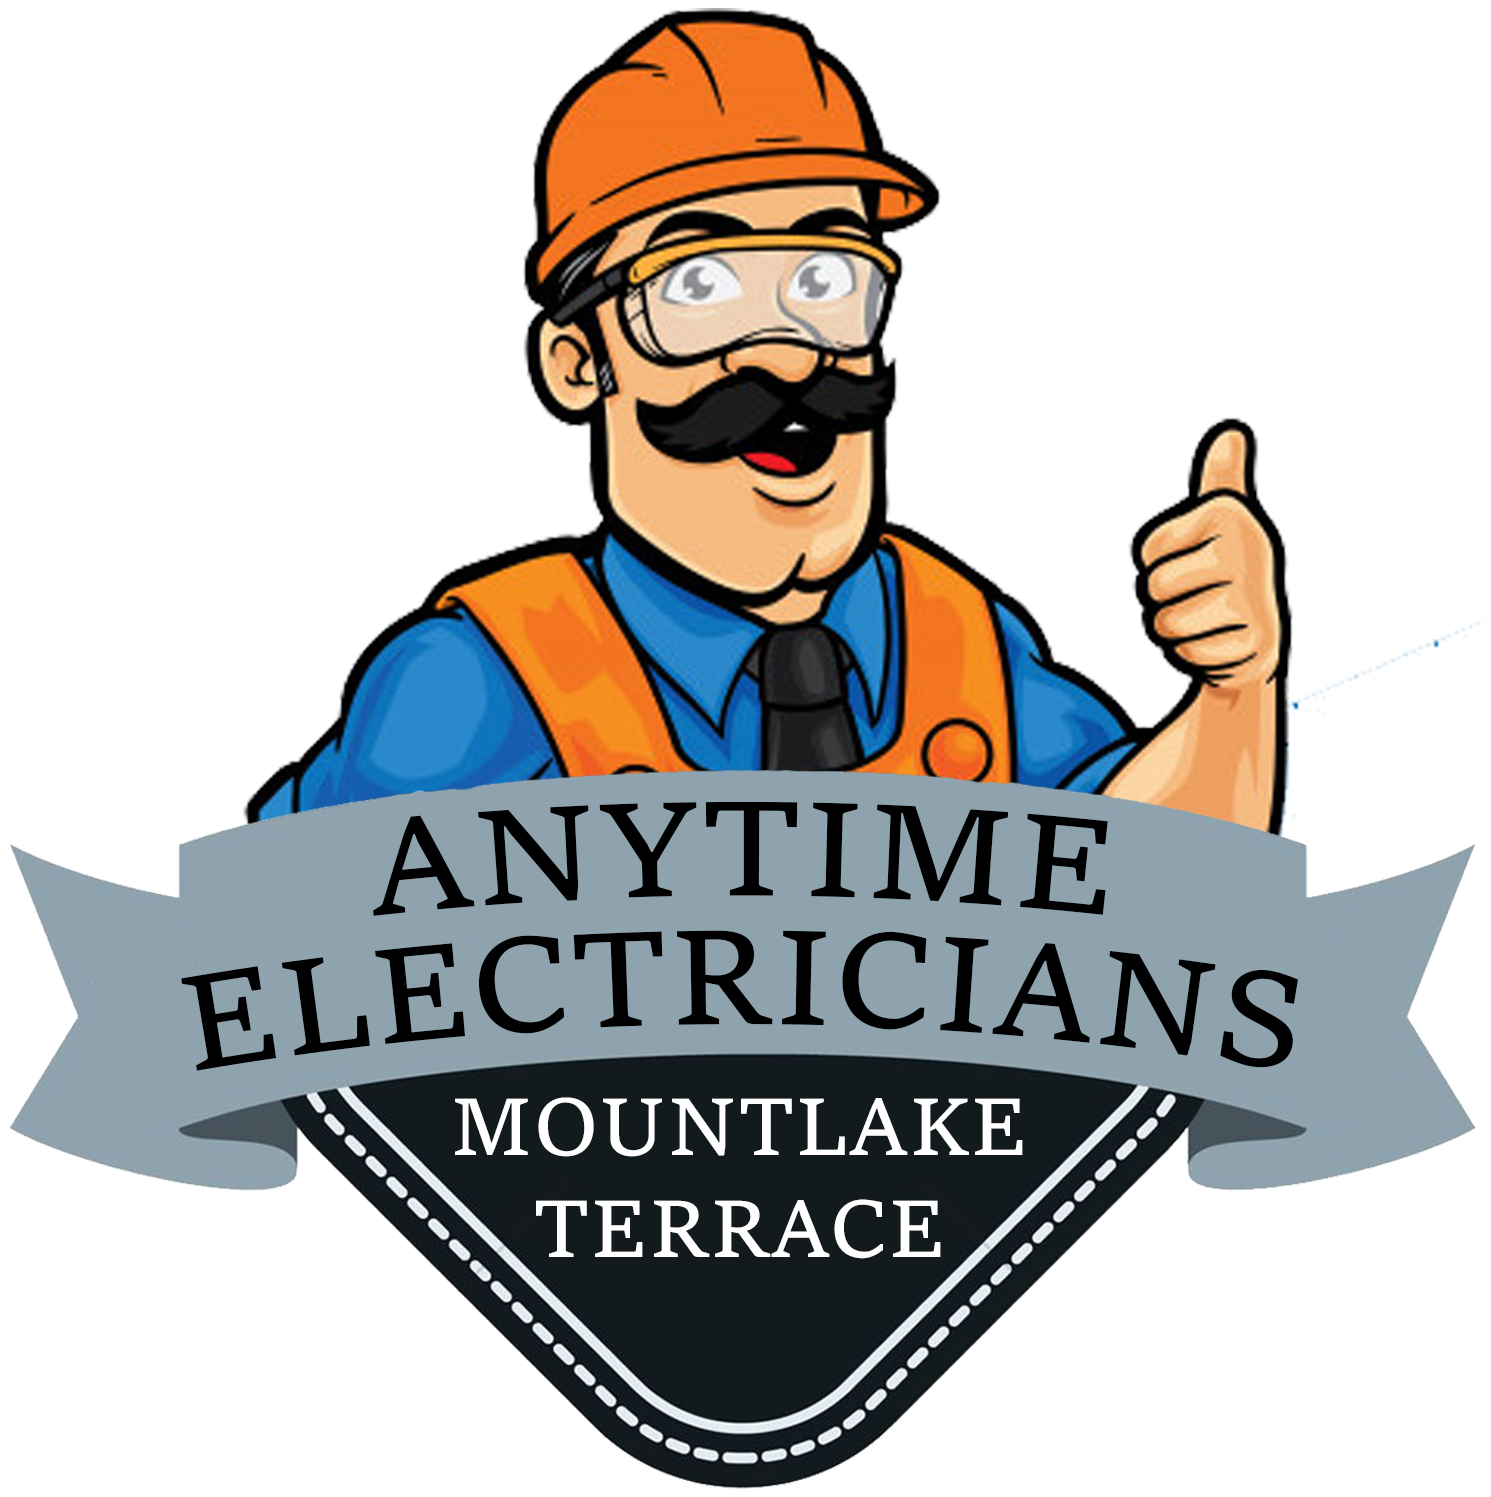 electrician clipart electrical service